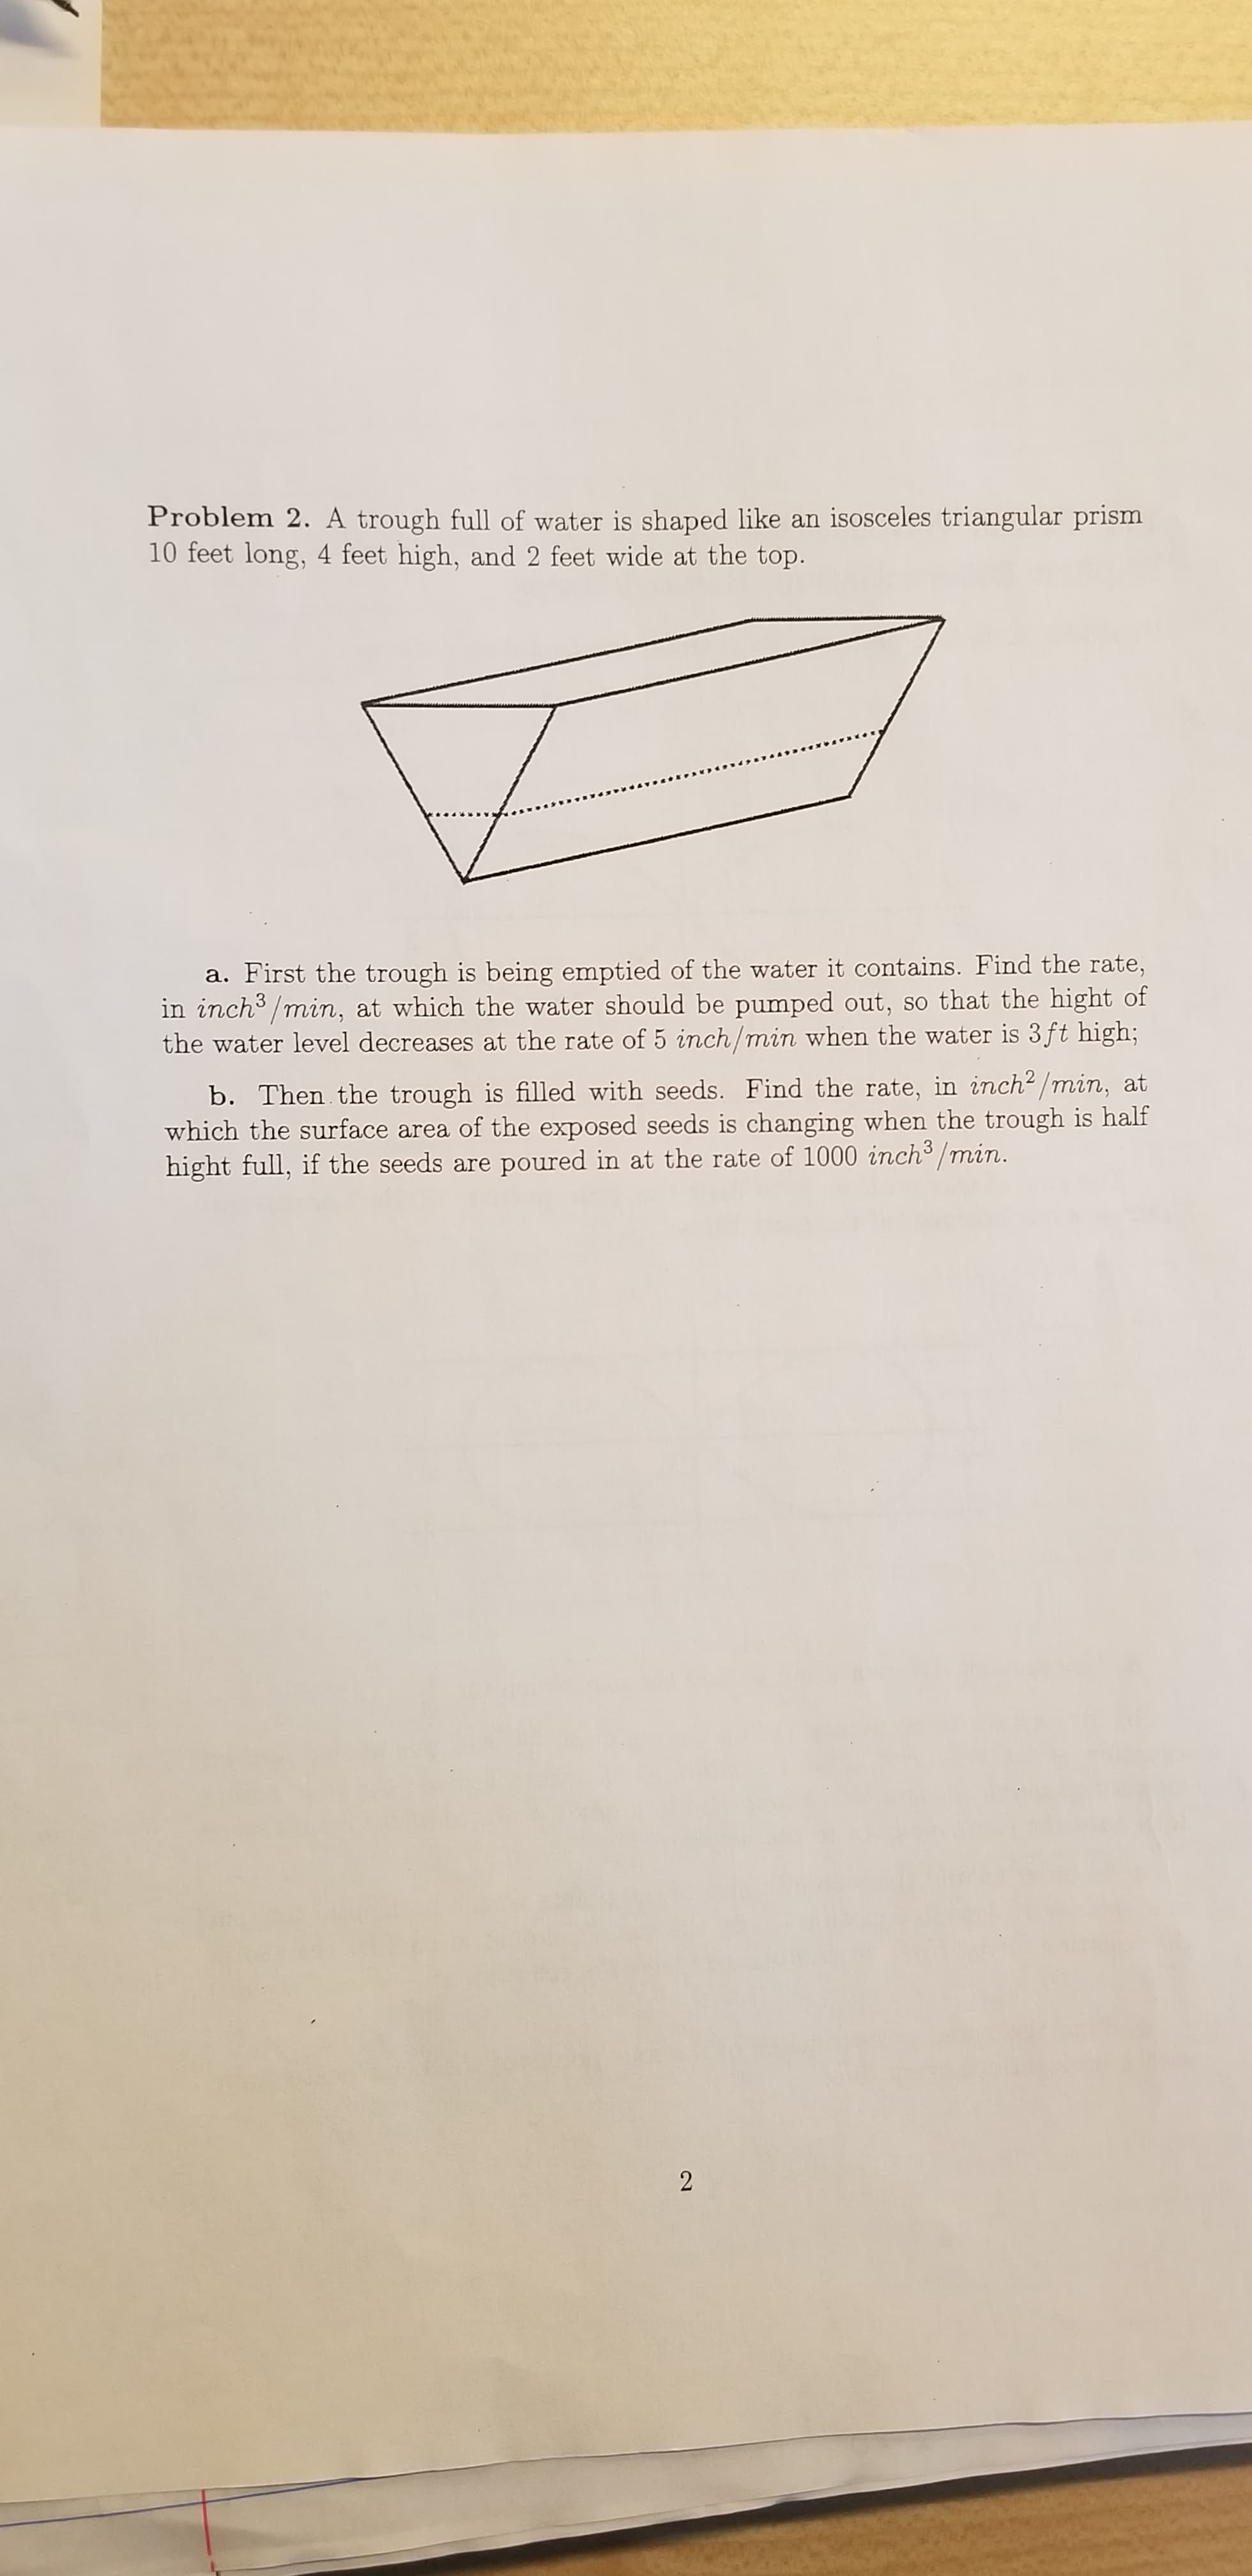 Problem 2. A trough full of water is shaped like an isosceles triangular prism
10 feet long, 4 feet high, and 2 feet wide at the top.
a. First the trough is being emptied of the water it contains. Find the rate,
in inch/min, at which the water should be pumped out, so that the hight of
the water level decreases at the rate of 5 inch/min when the water is 3ft high;
b. Then the trough is filled with seeds. Find the rate, in inch2/min, at
which the surface area of the exposed seeds is changing when the trough is half
hight full, if the seeds are poured in at the rate of 1000 inch3/min.
2
